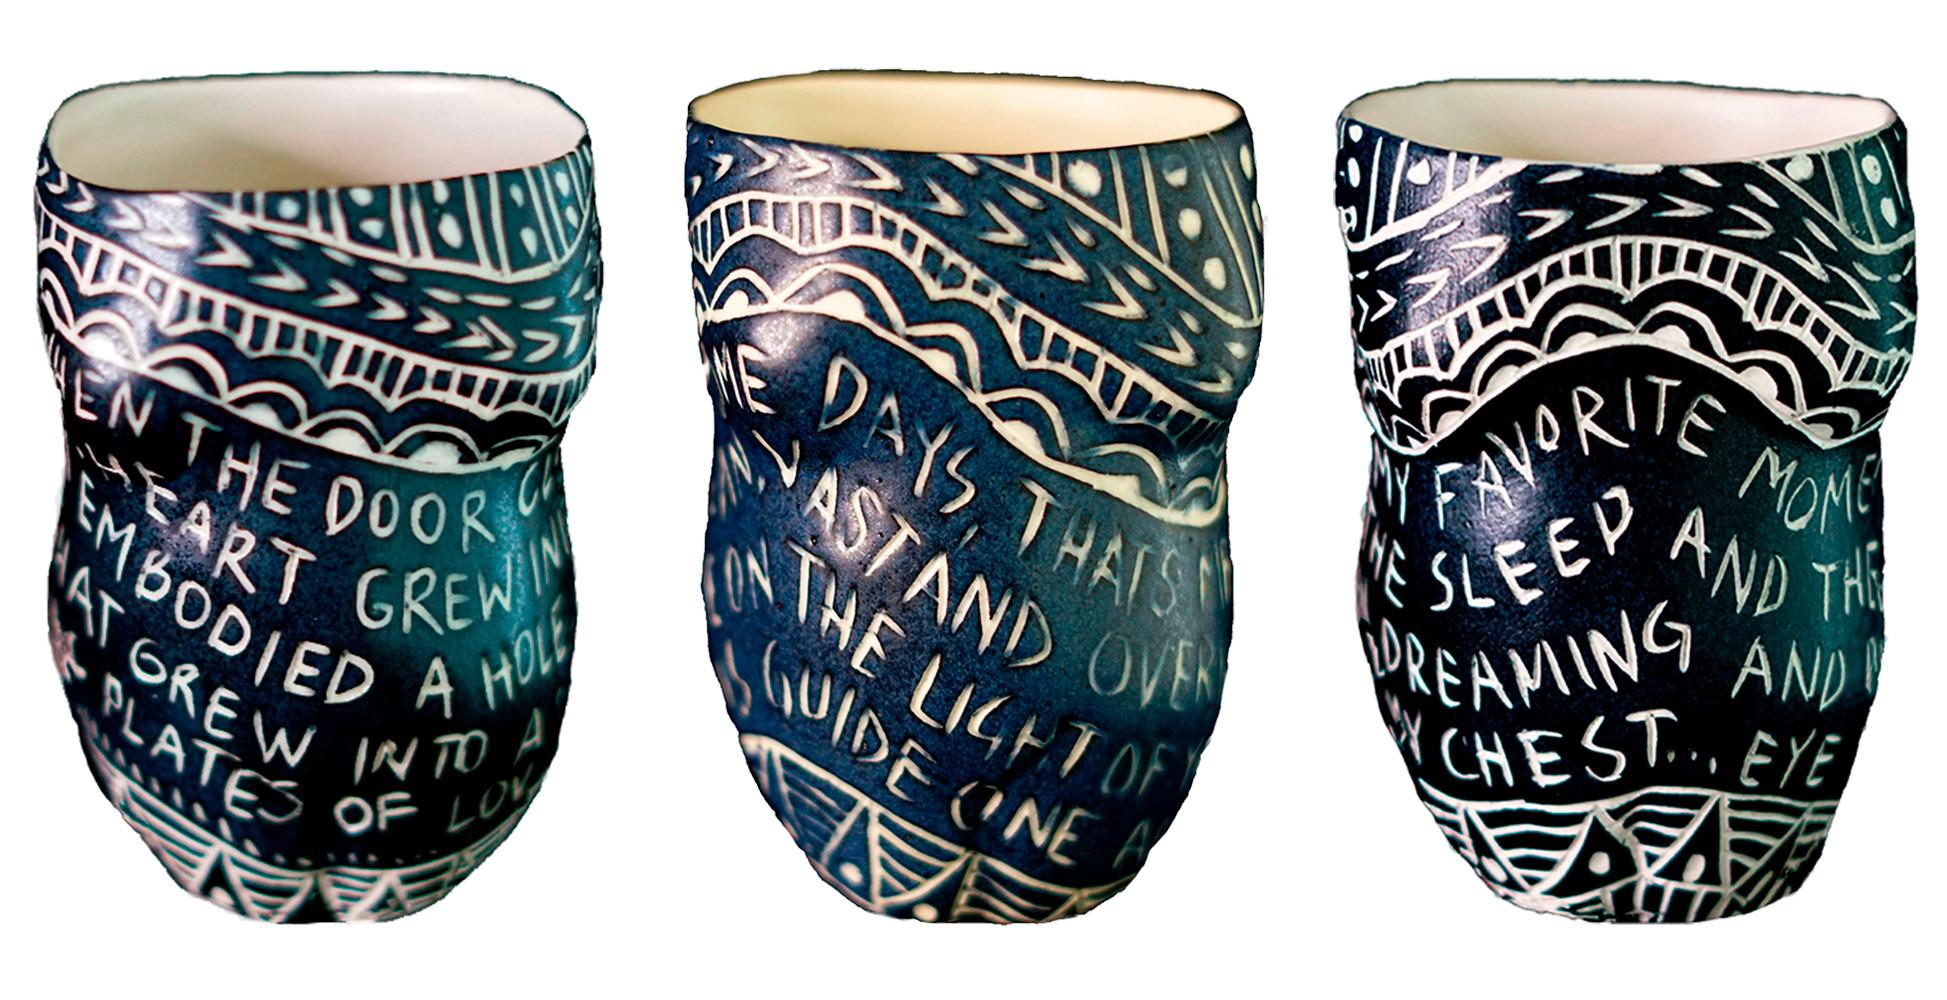 Set of 3 Handmade Porcelain Cups with Sgraffito Detailing